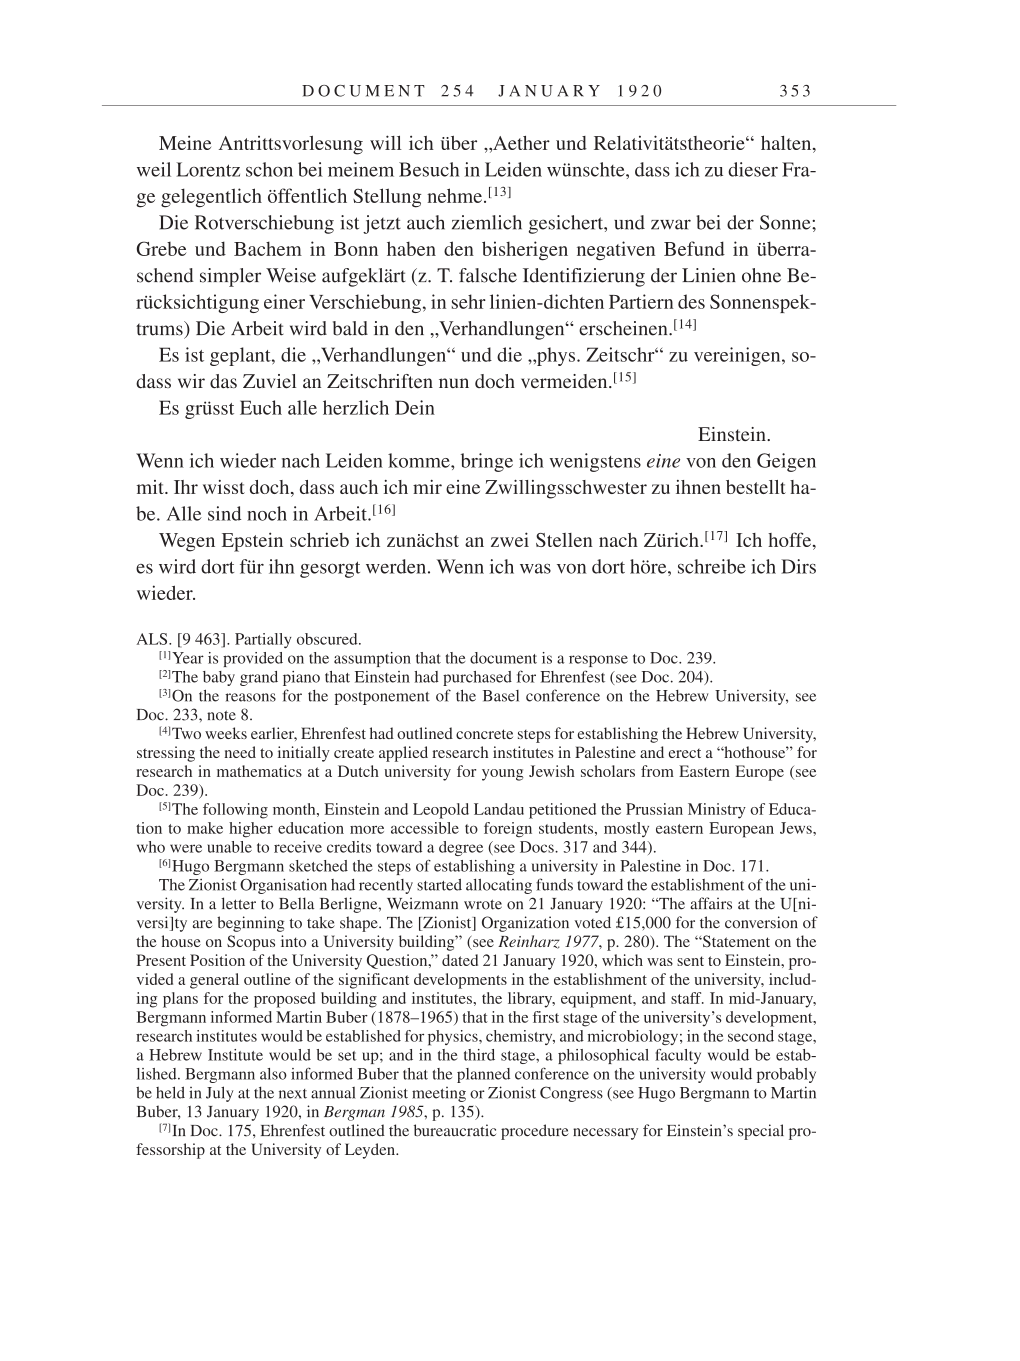 Volume 9: The Berlin Years: Correspondence January 1919-April 1920 page 353